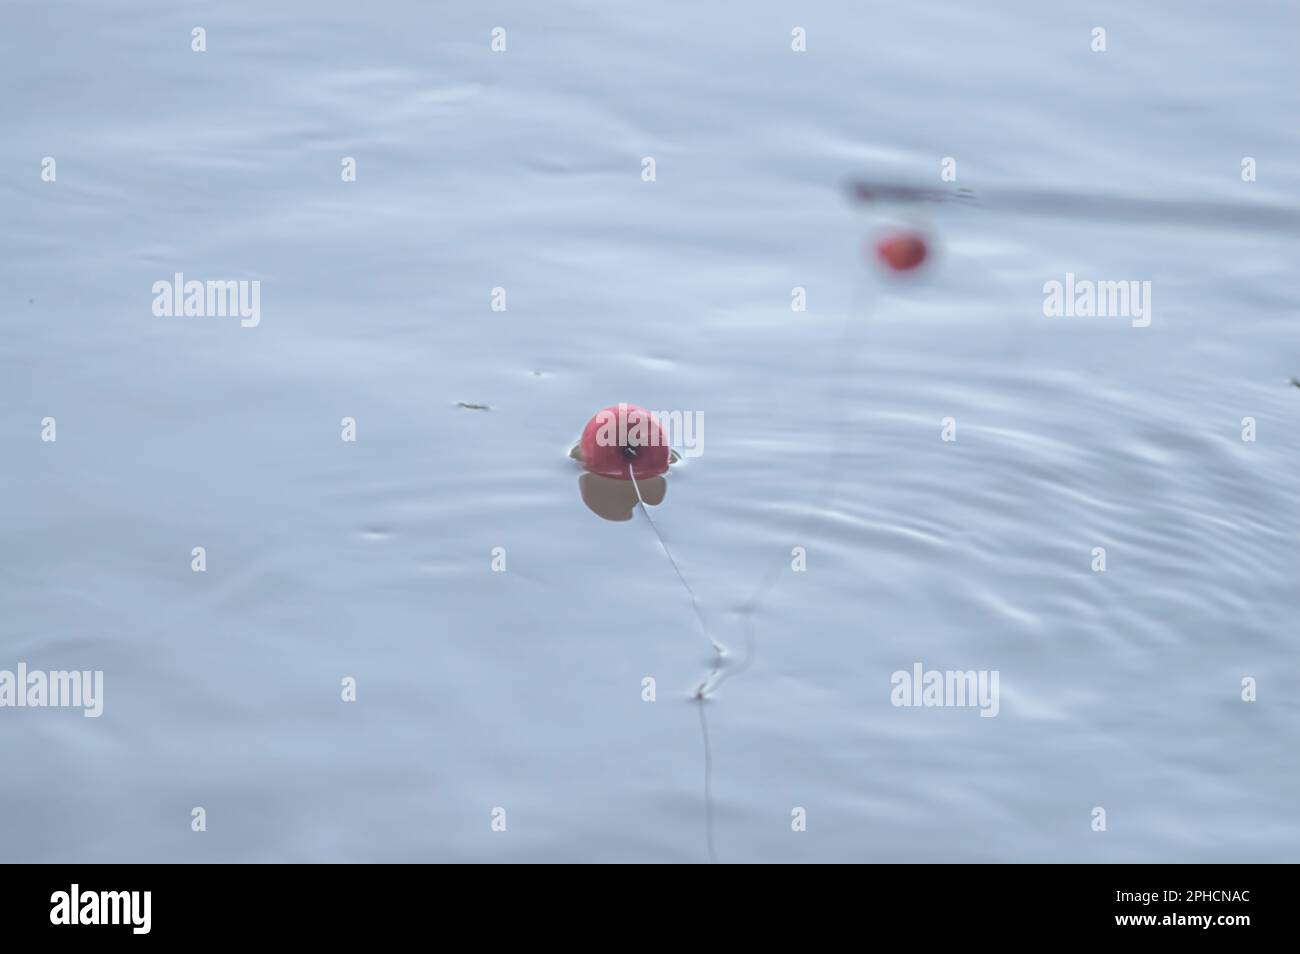 Concept of fishing with fishing buoy in the water with line